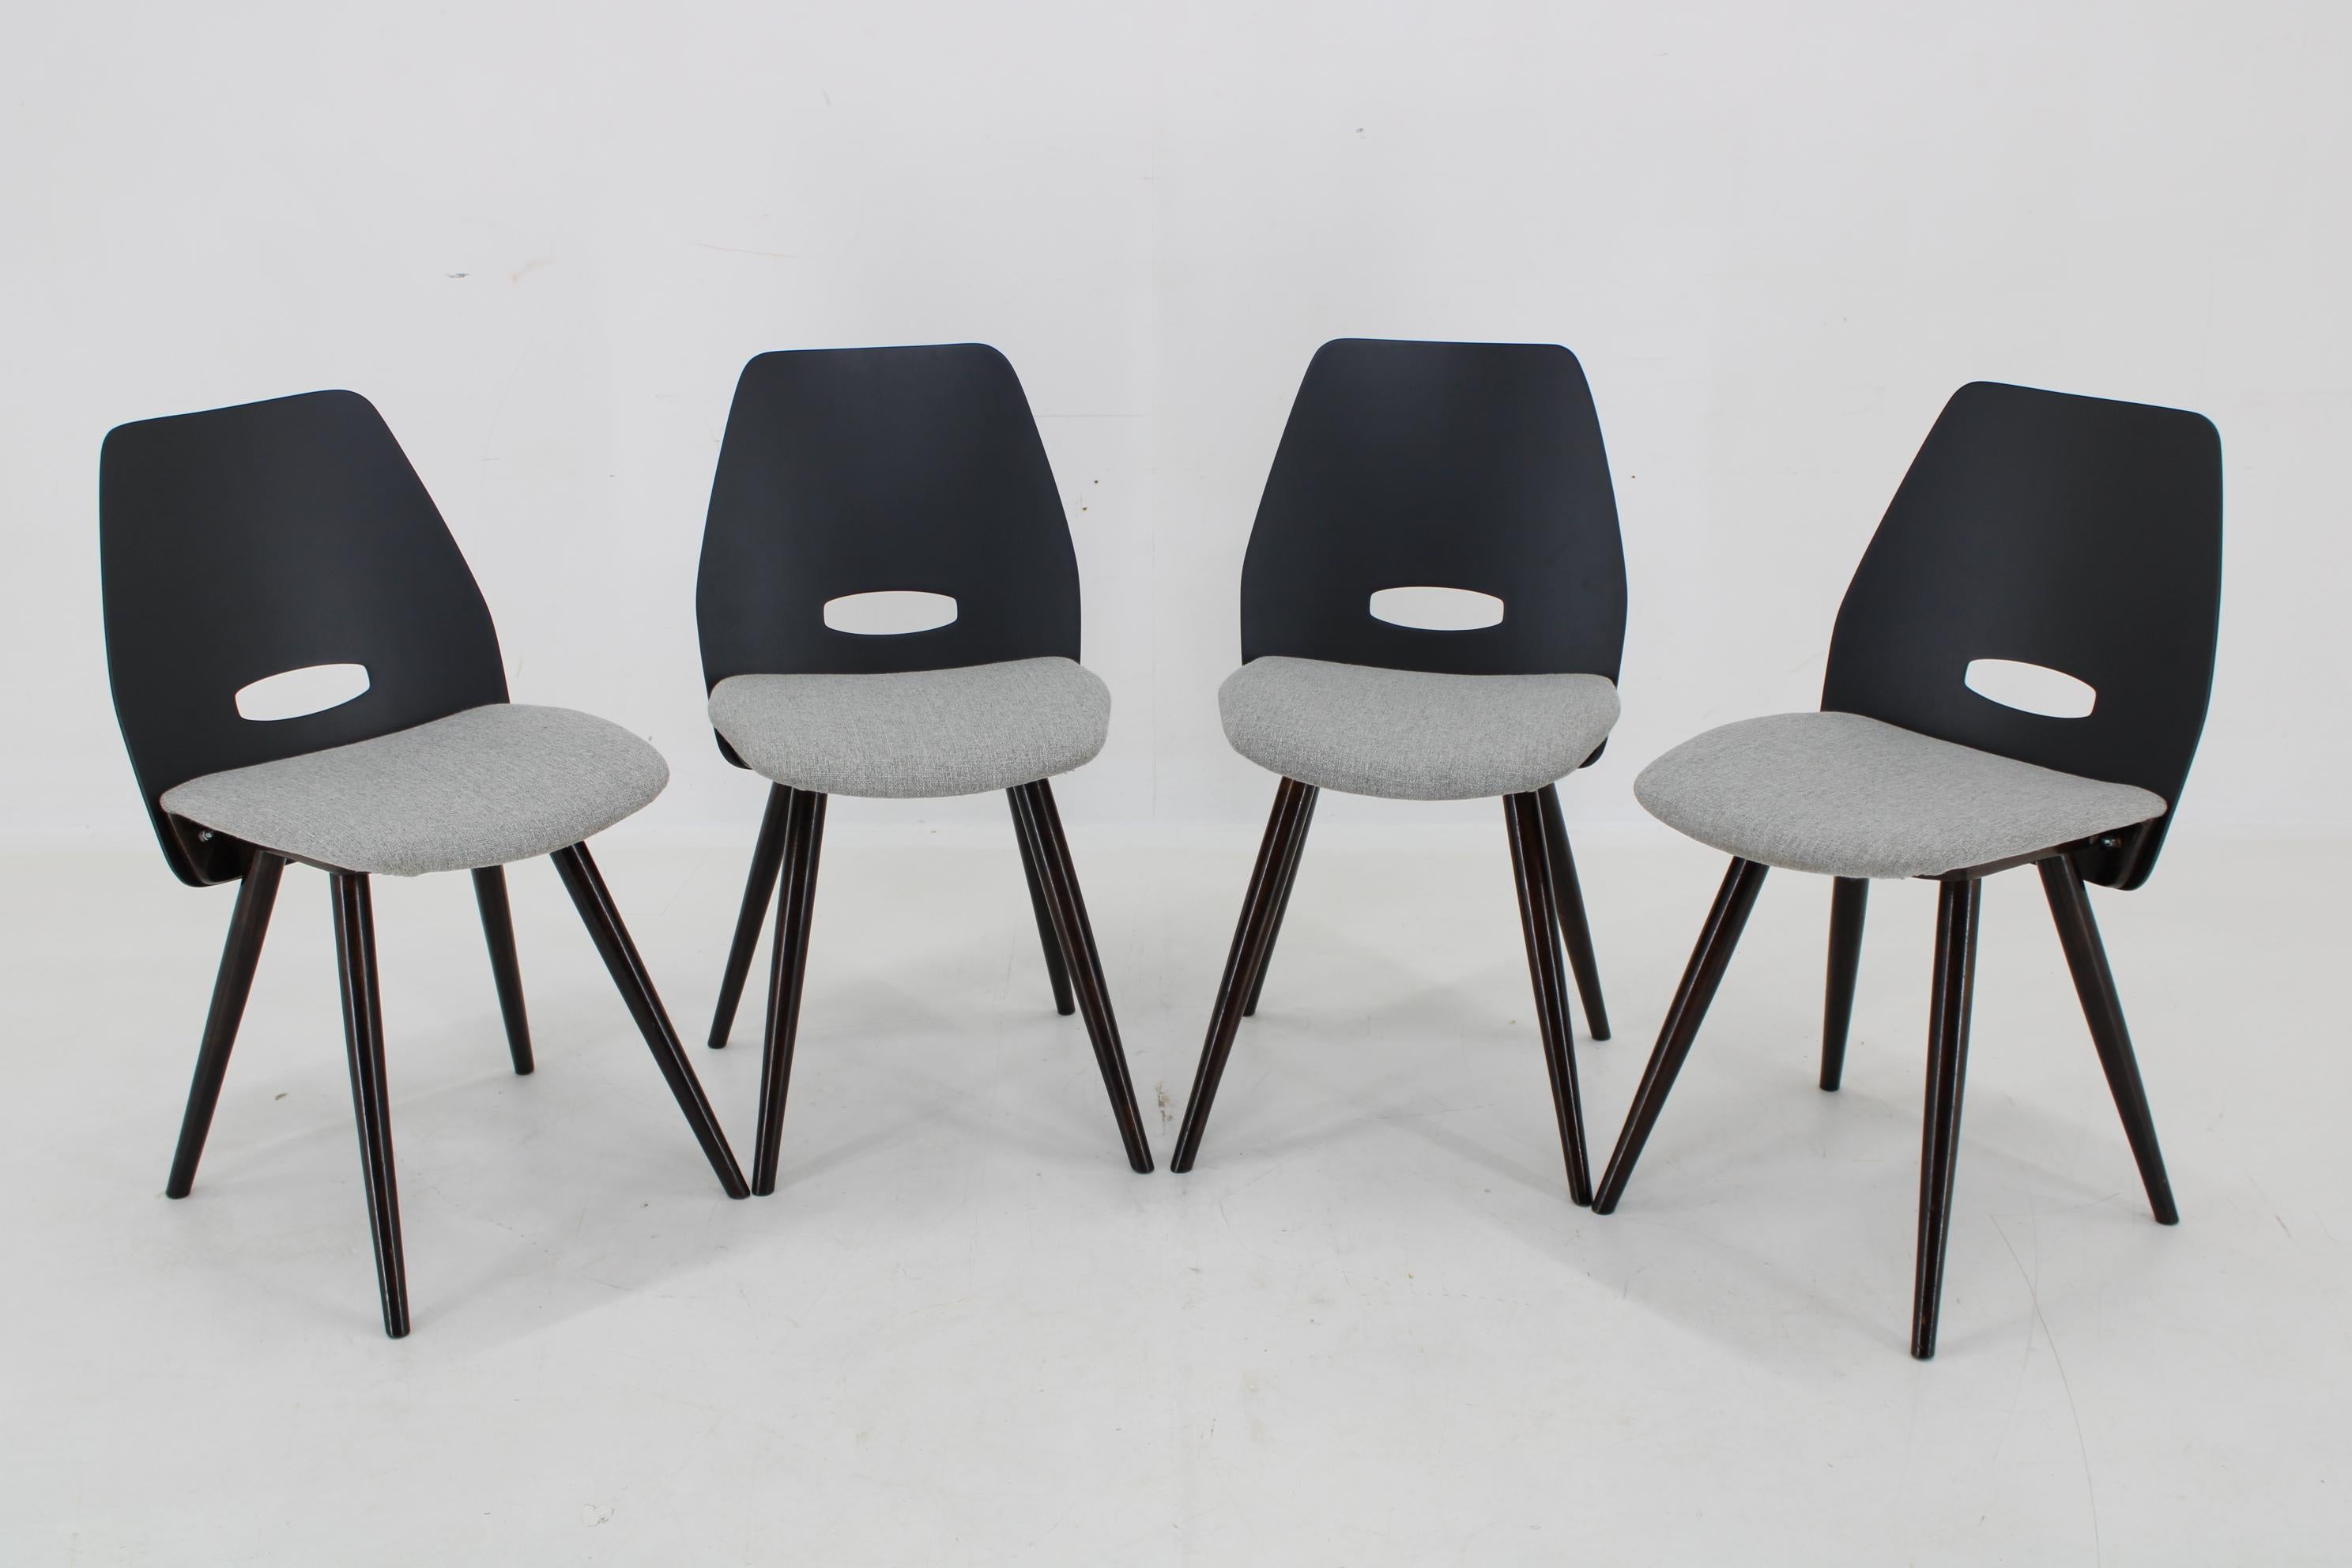 - Carefully refurbished
- Newly upholstered
- Backrests has been lacquered in charcoal black color 